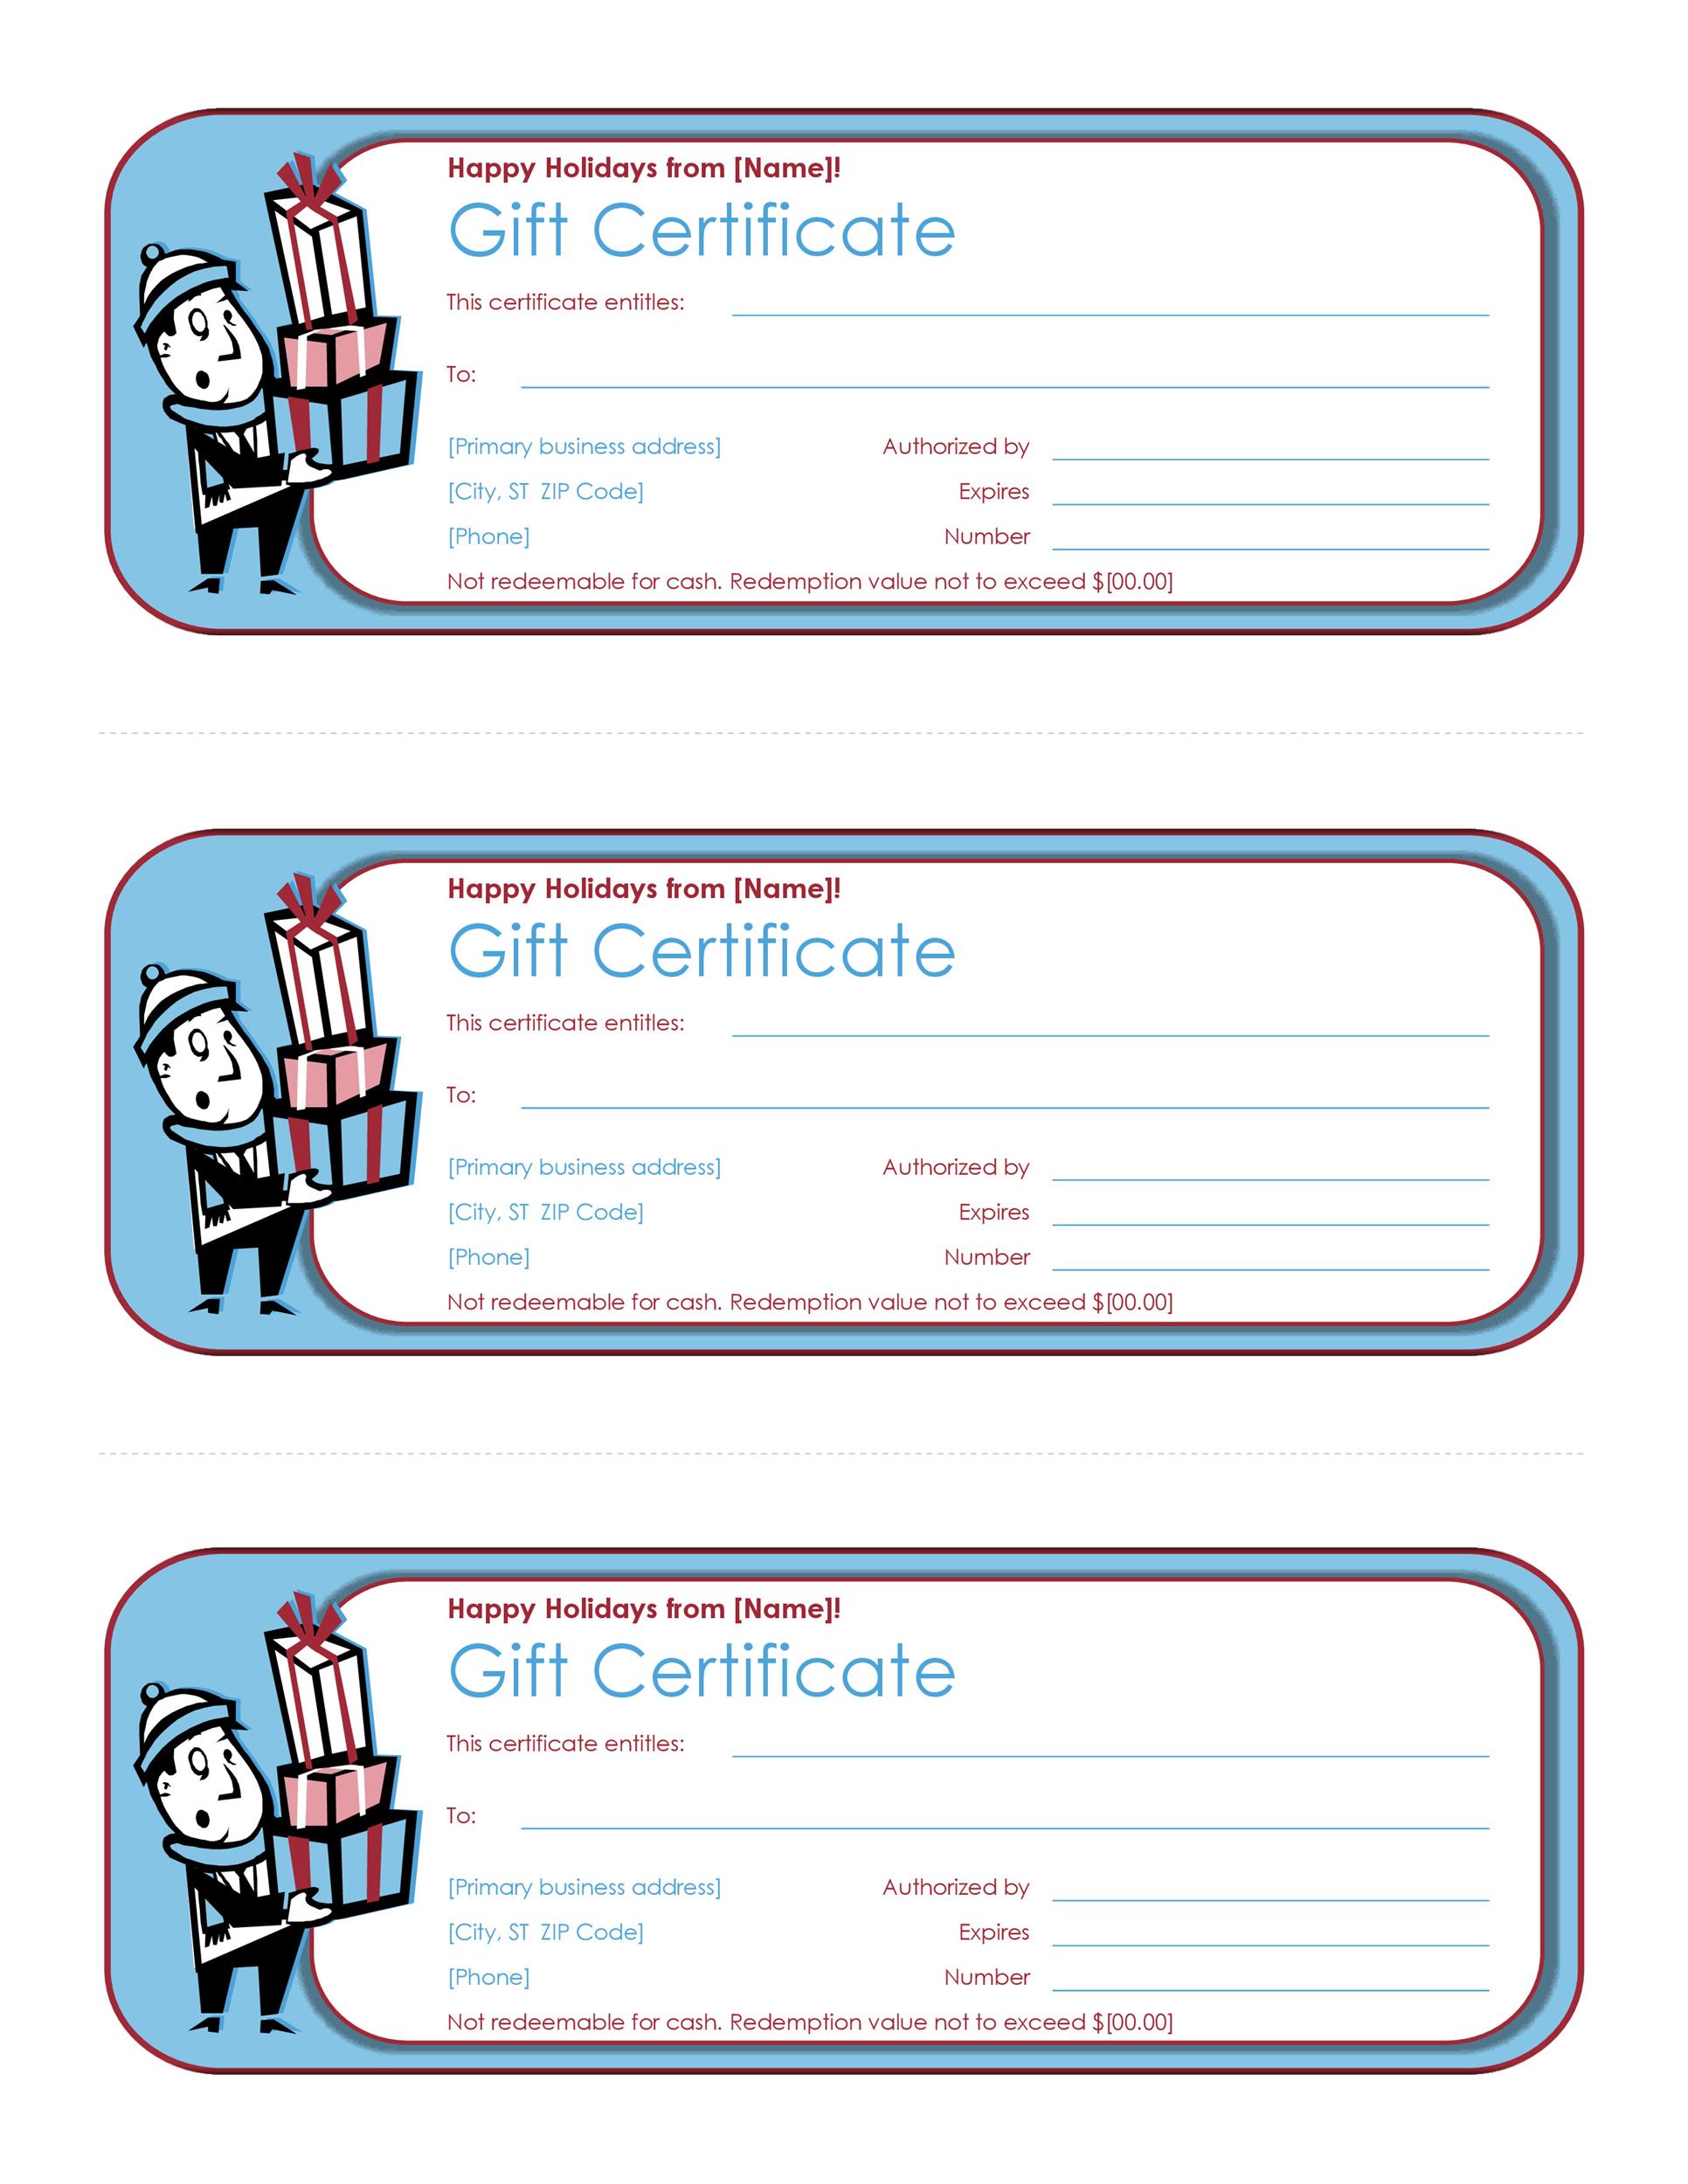 gift certificates templates awesome download gift certificate 动态图库网